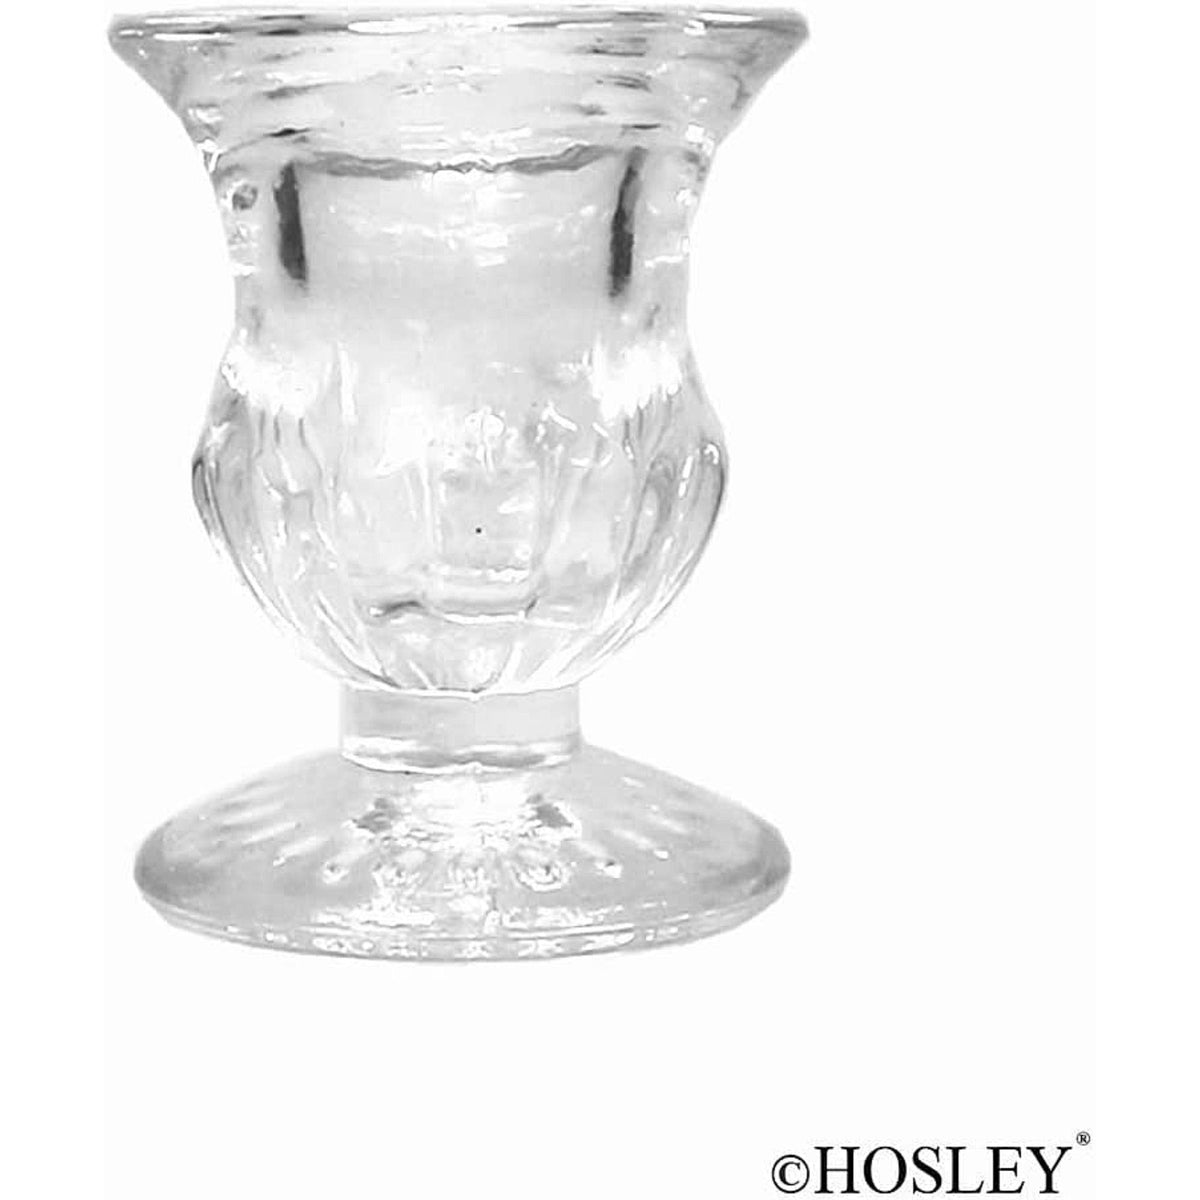 Hosley's Set of 72 Crystal Clear Votive/Tea Light Glass Candle Holders.  Bulk Buy. Ideal for Parties, Wedding, Special Events, Aromatherapy and  Everyday Use. Tealights O2 – The Hosley Store